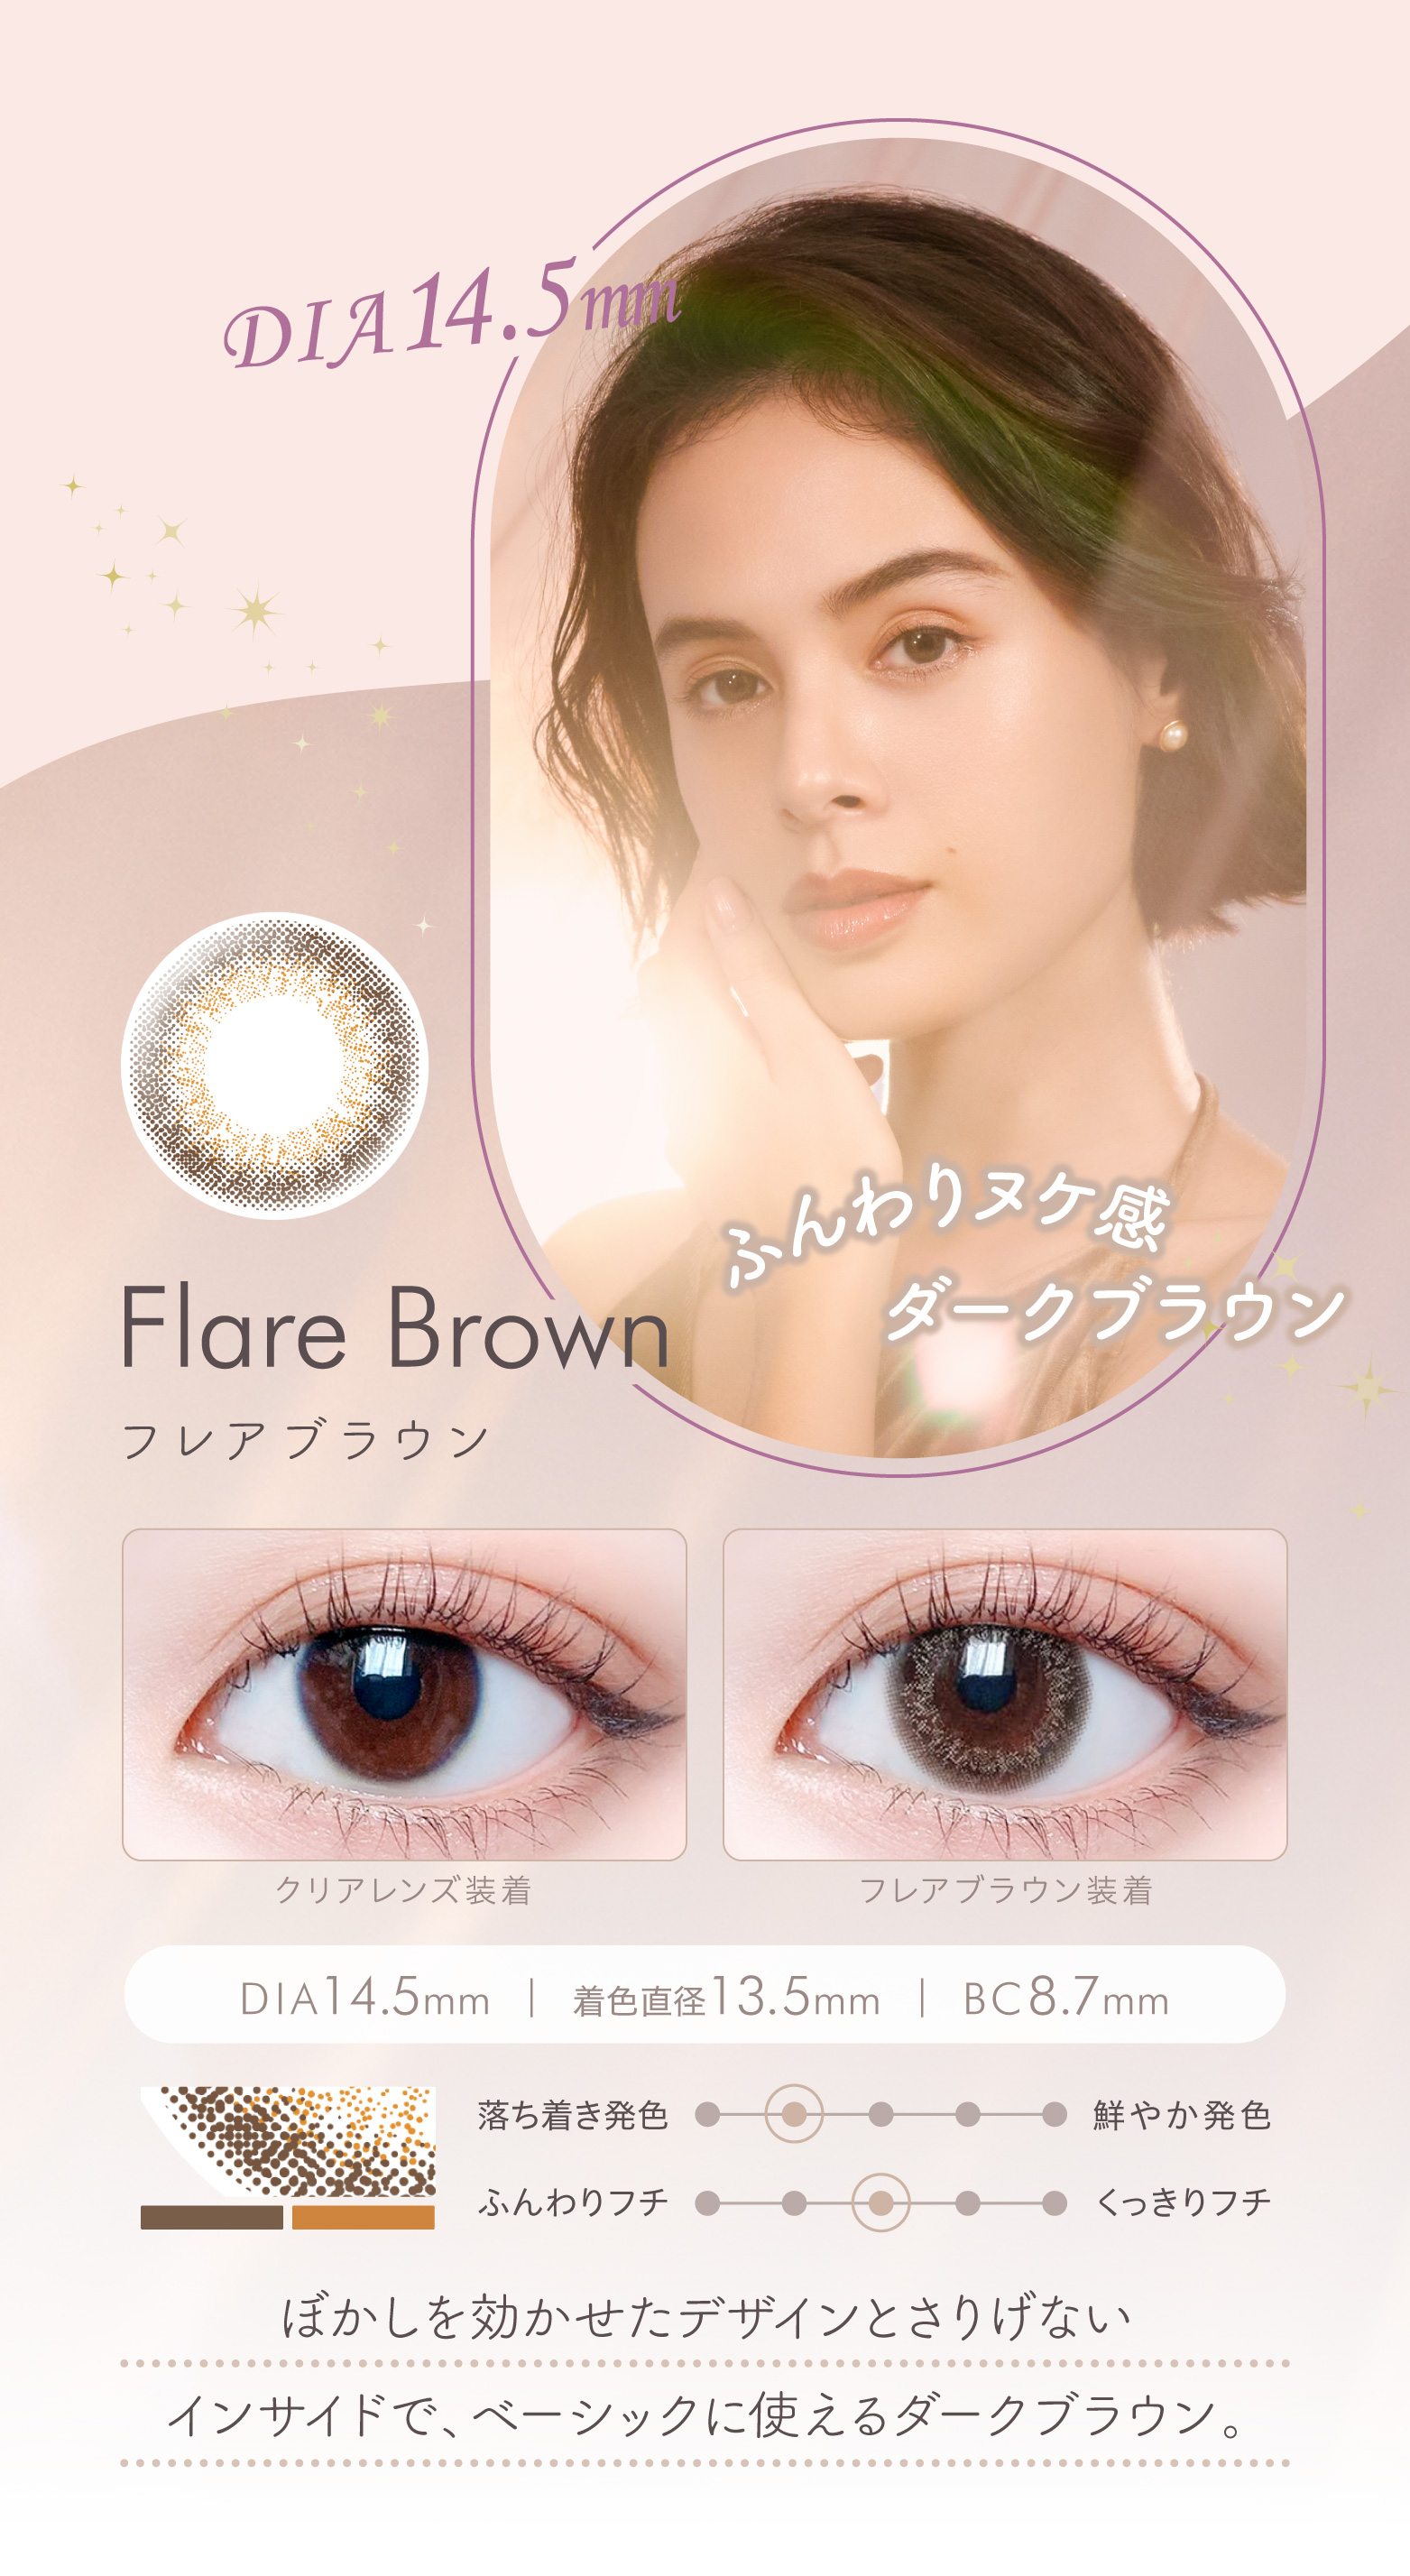 Flare Brown